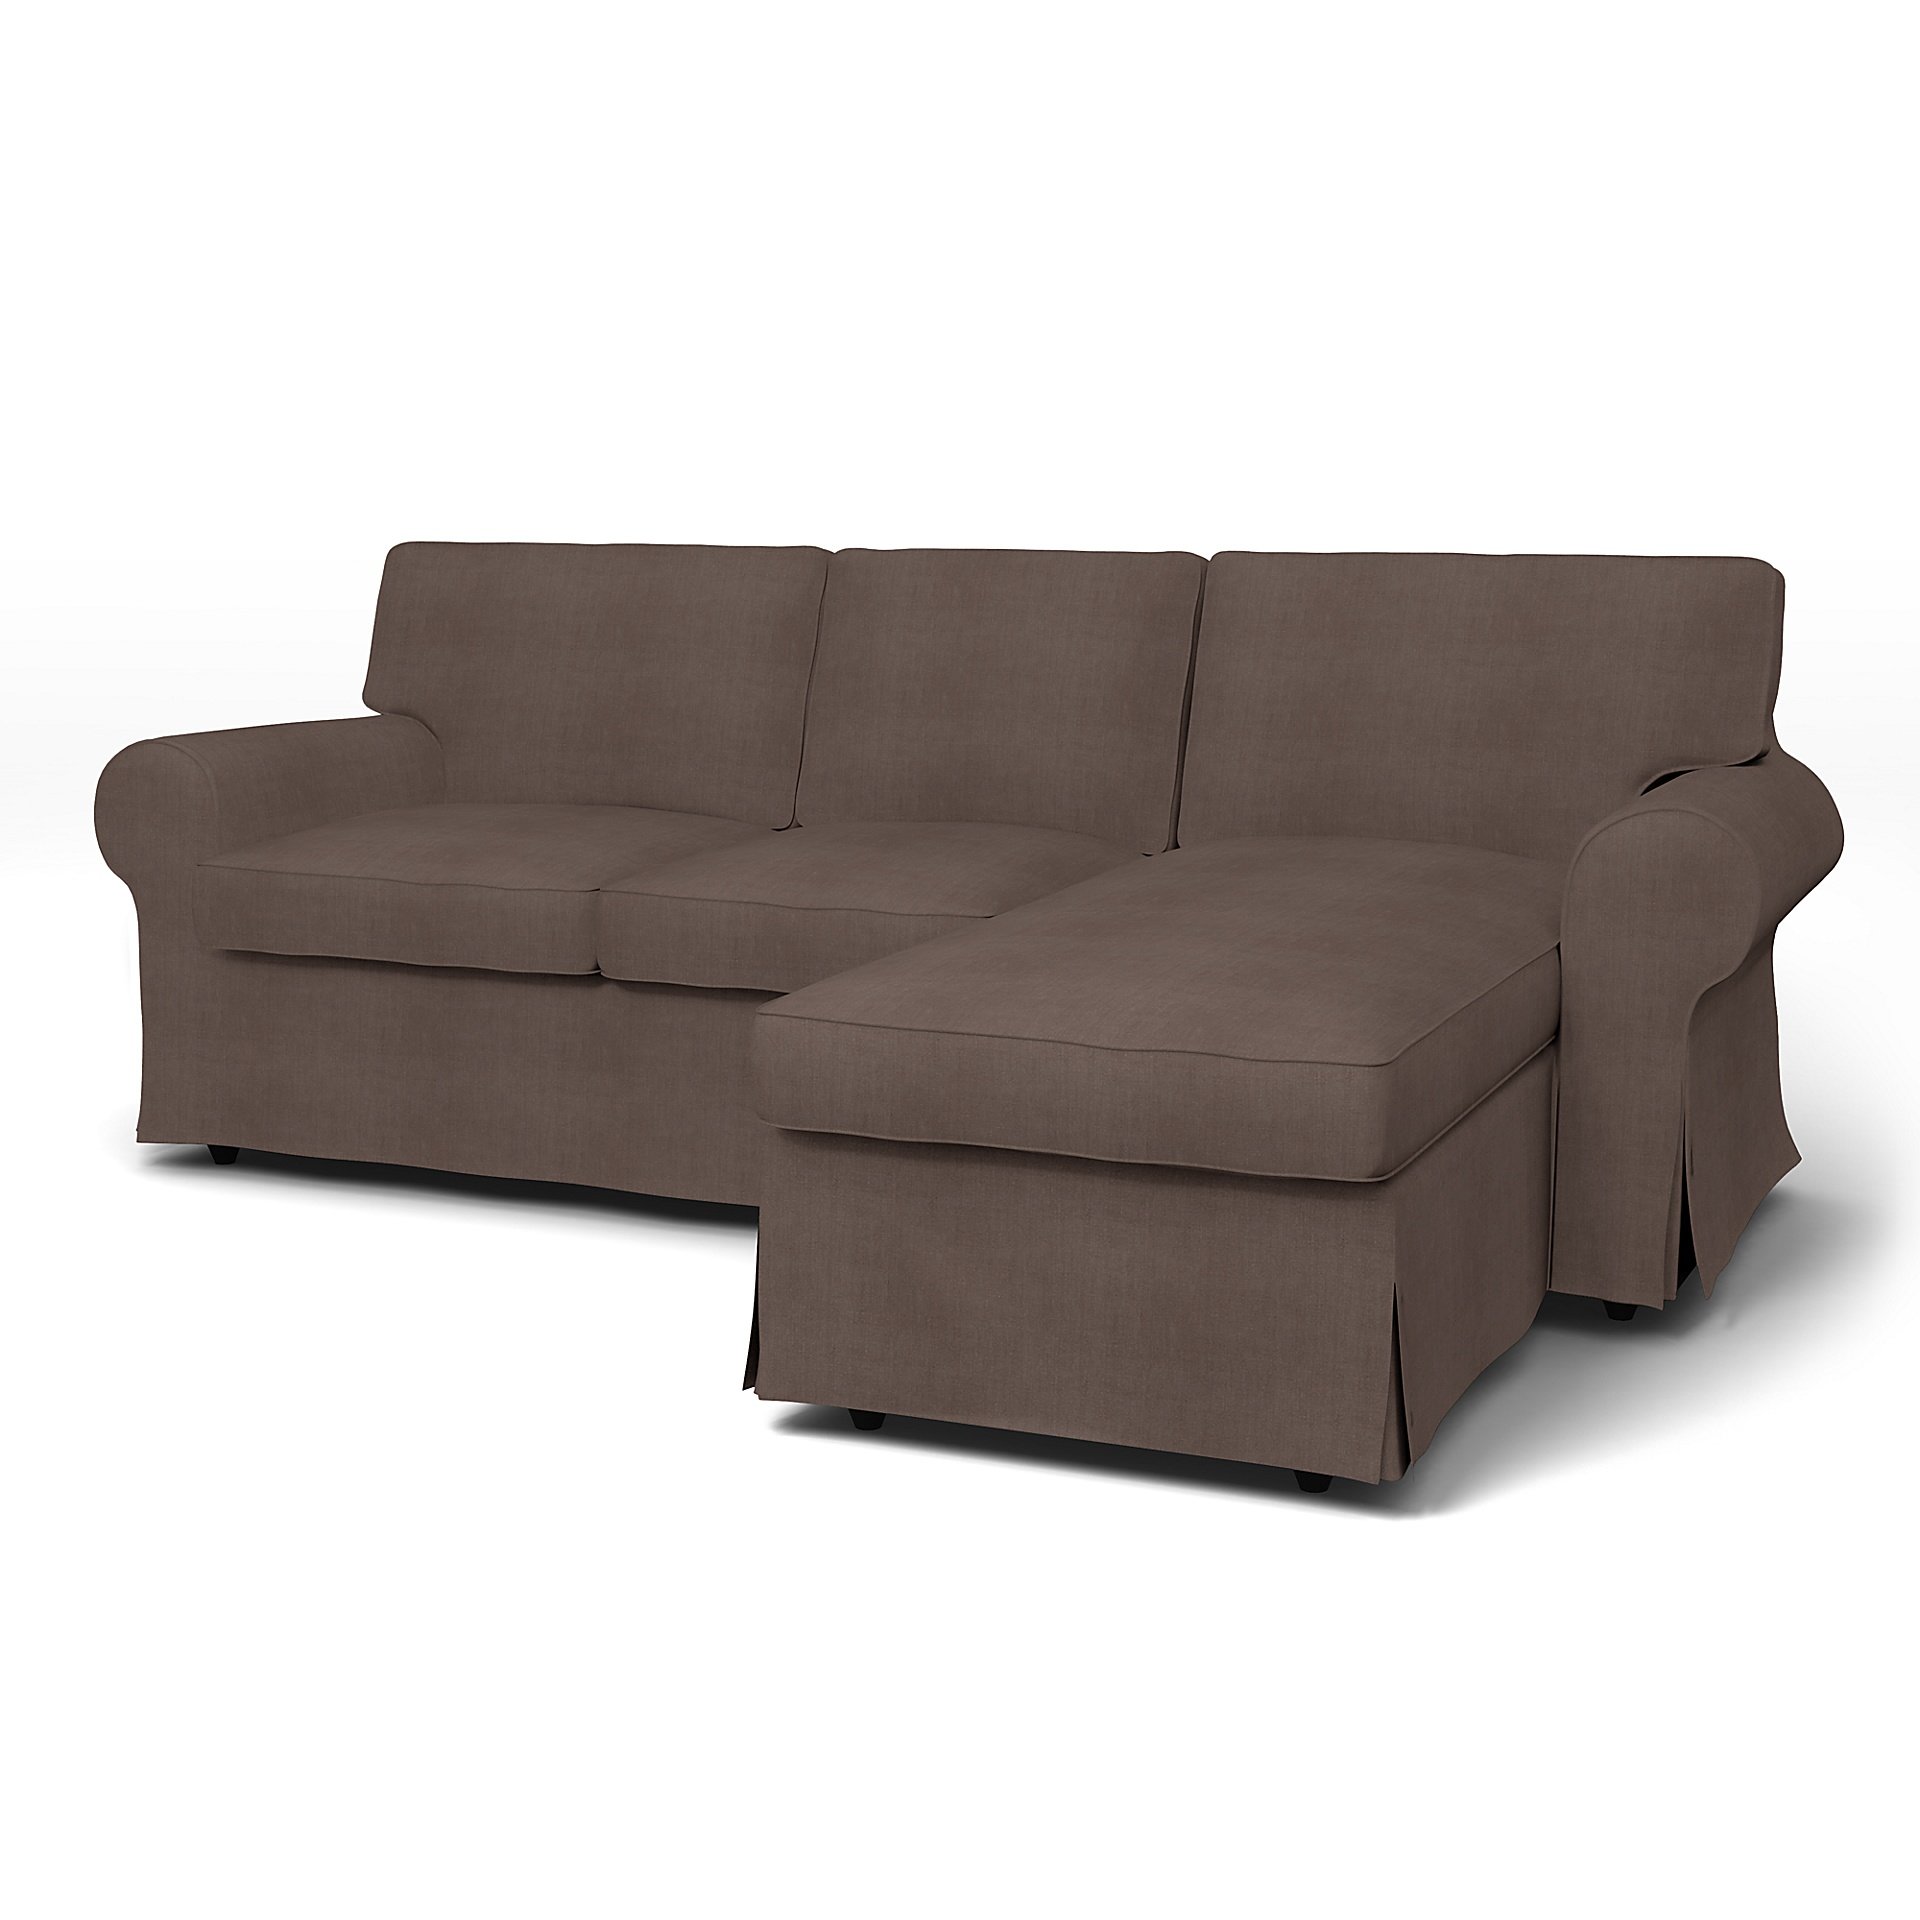 IKEA - Ektorp 3 Seater Sofa with Chaise Cover, Cocoa, Linen - Bemz